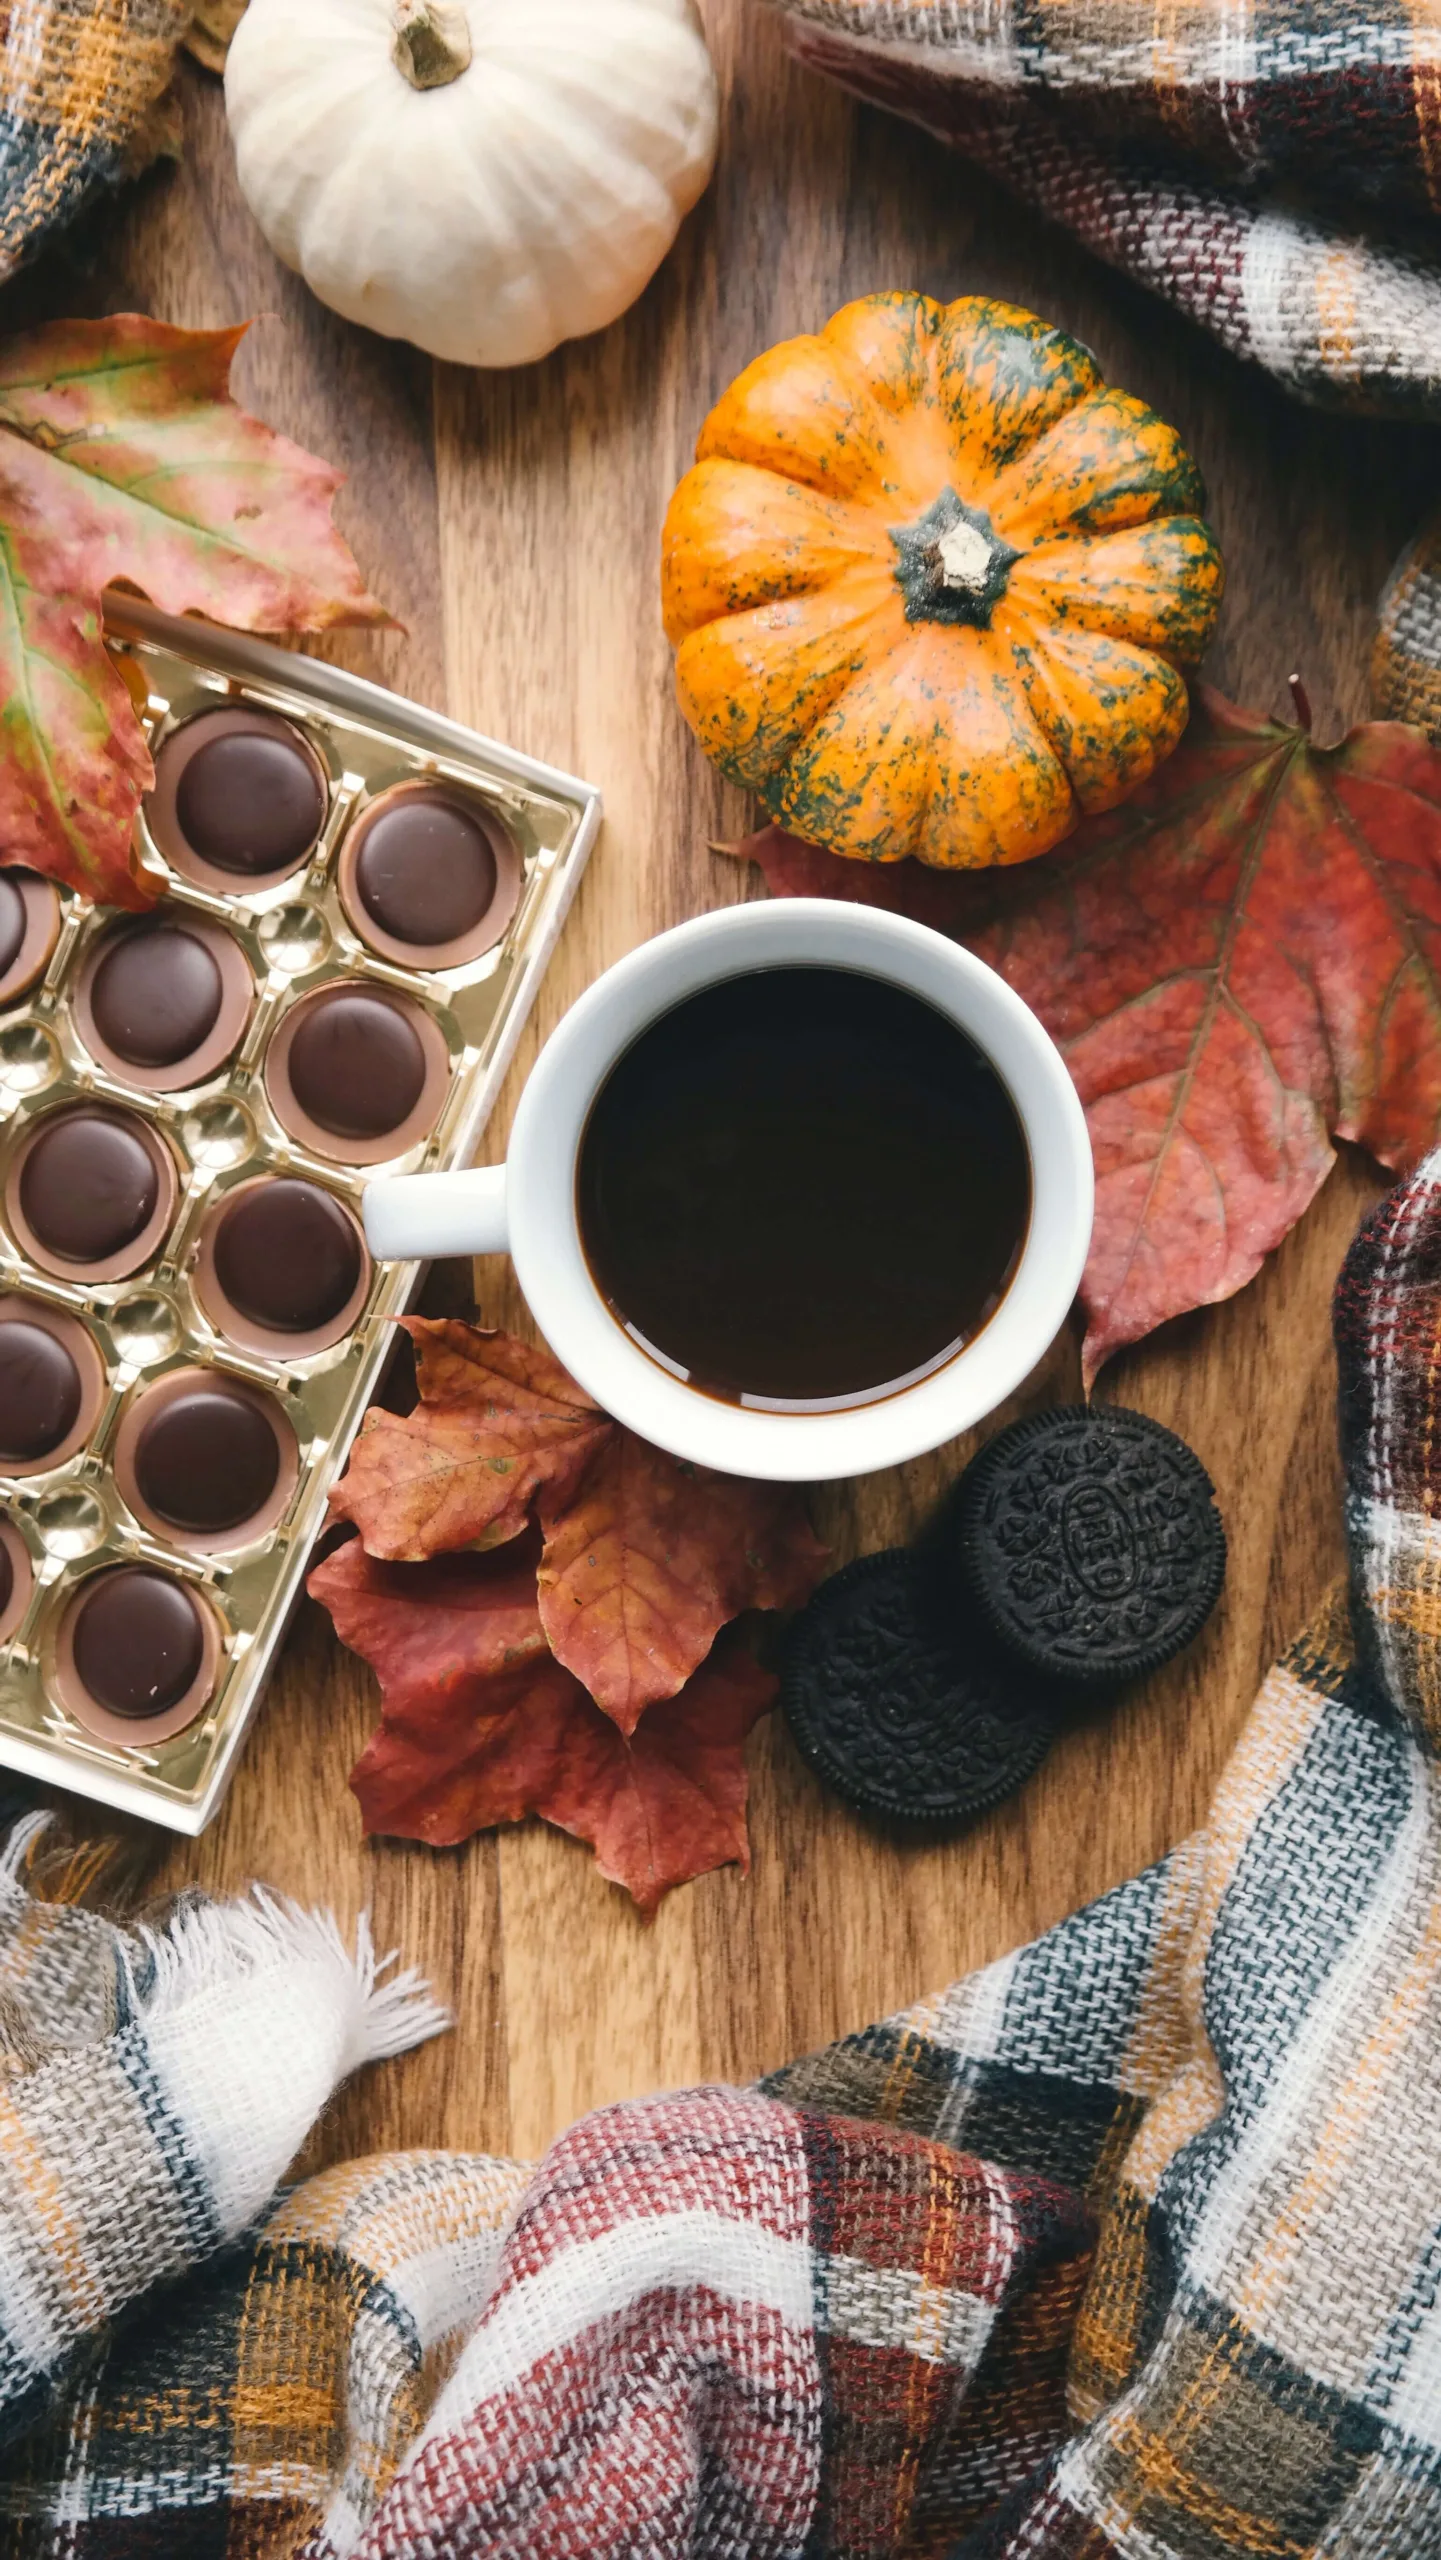 Taking a November reset with cozy pumpkins, chocolate candies and coffee